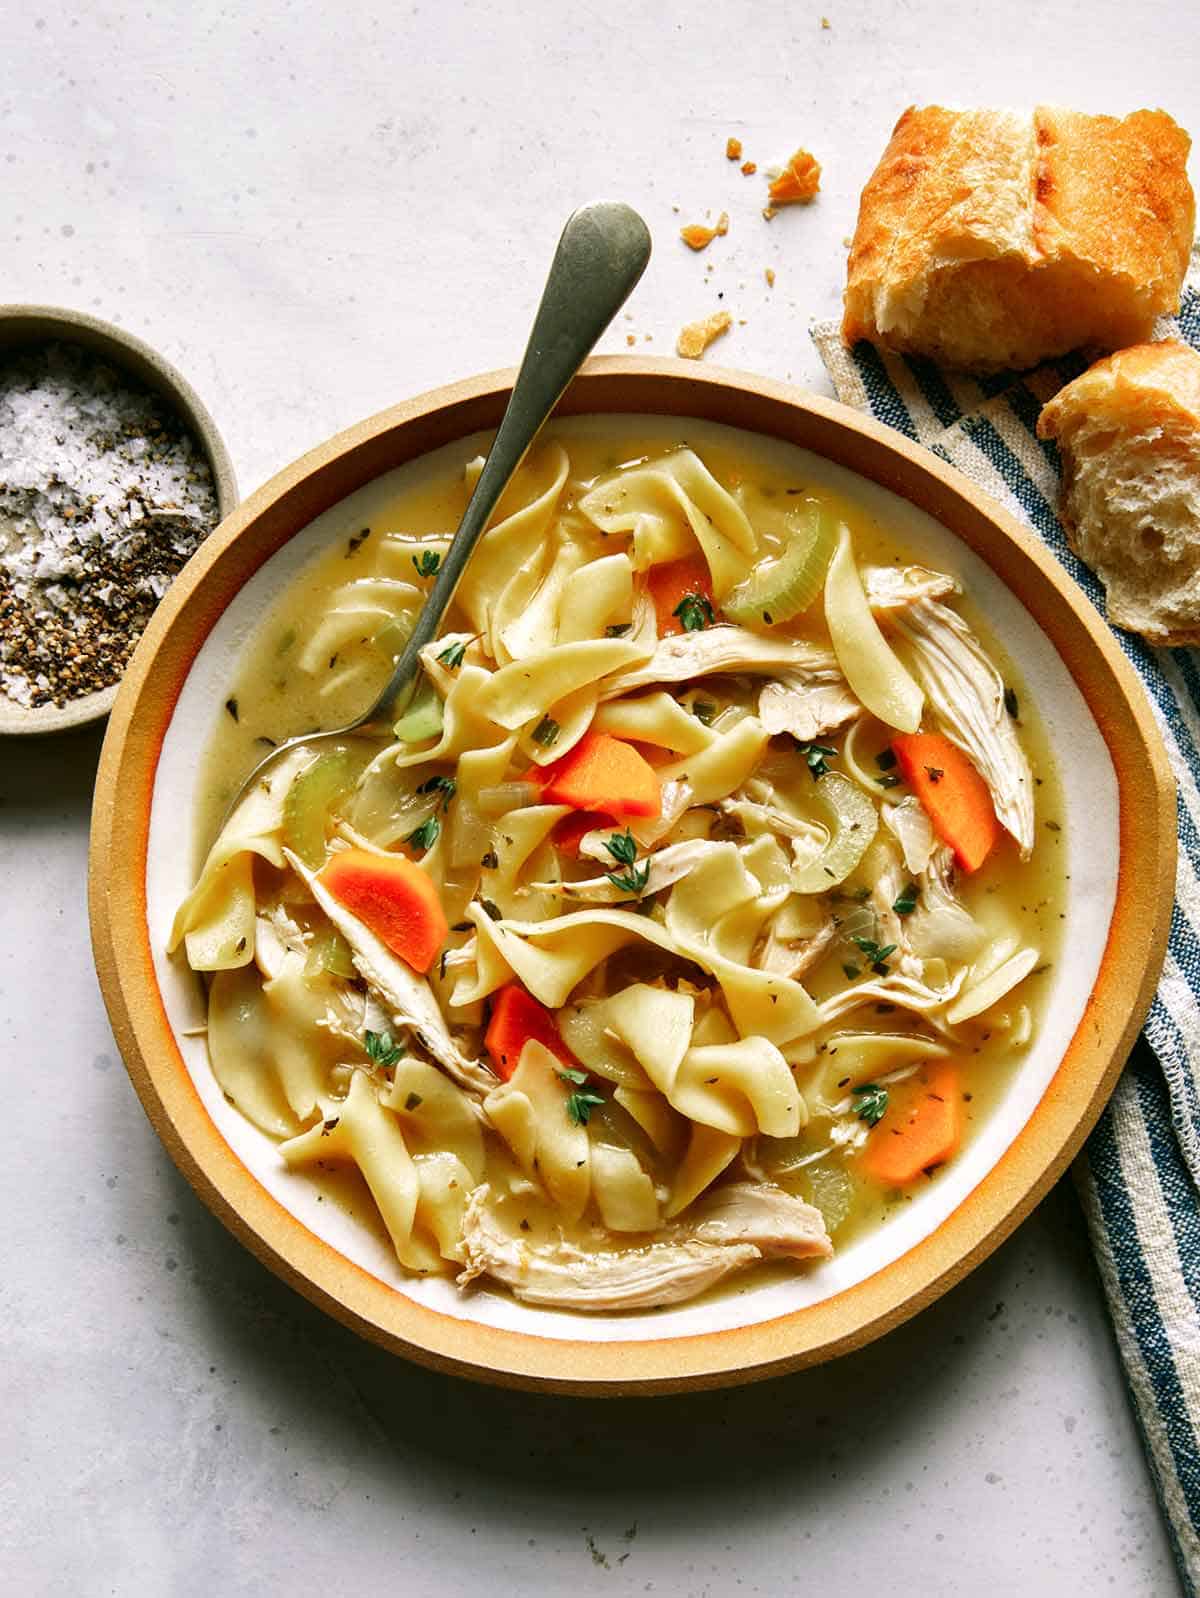 Chicken noodle soup recipe in a bowl with bread on the side. 